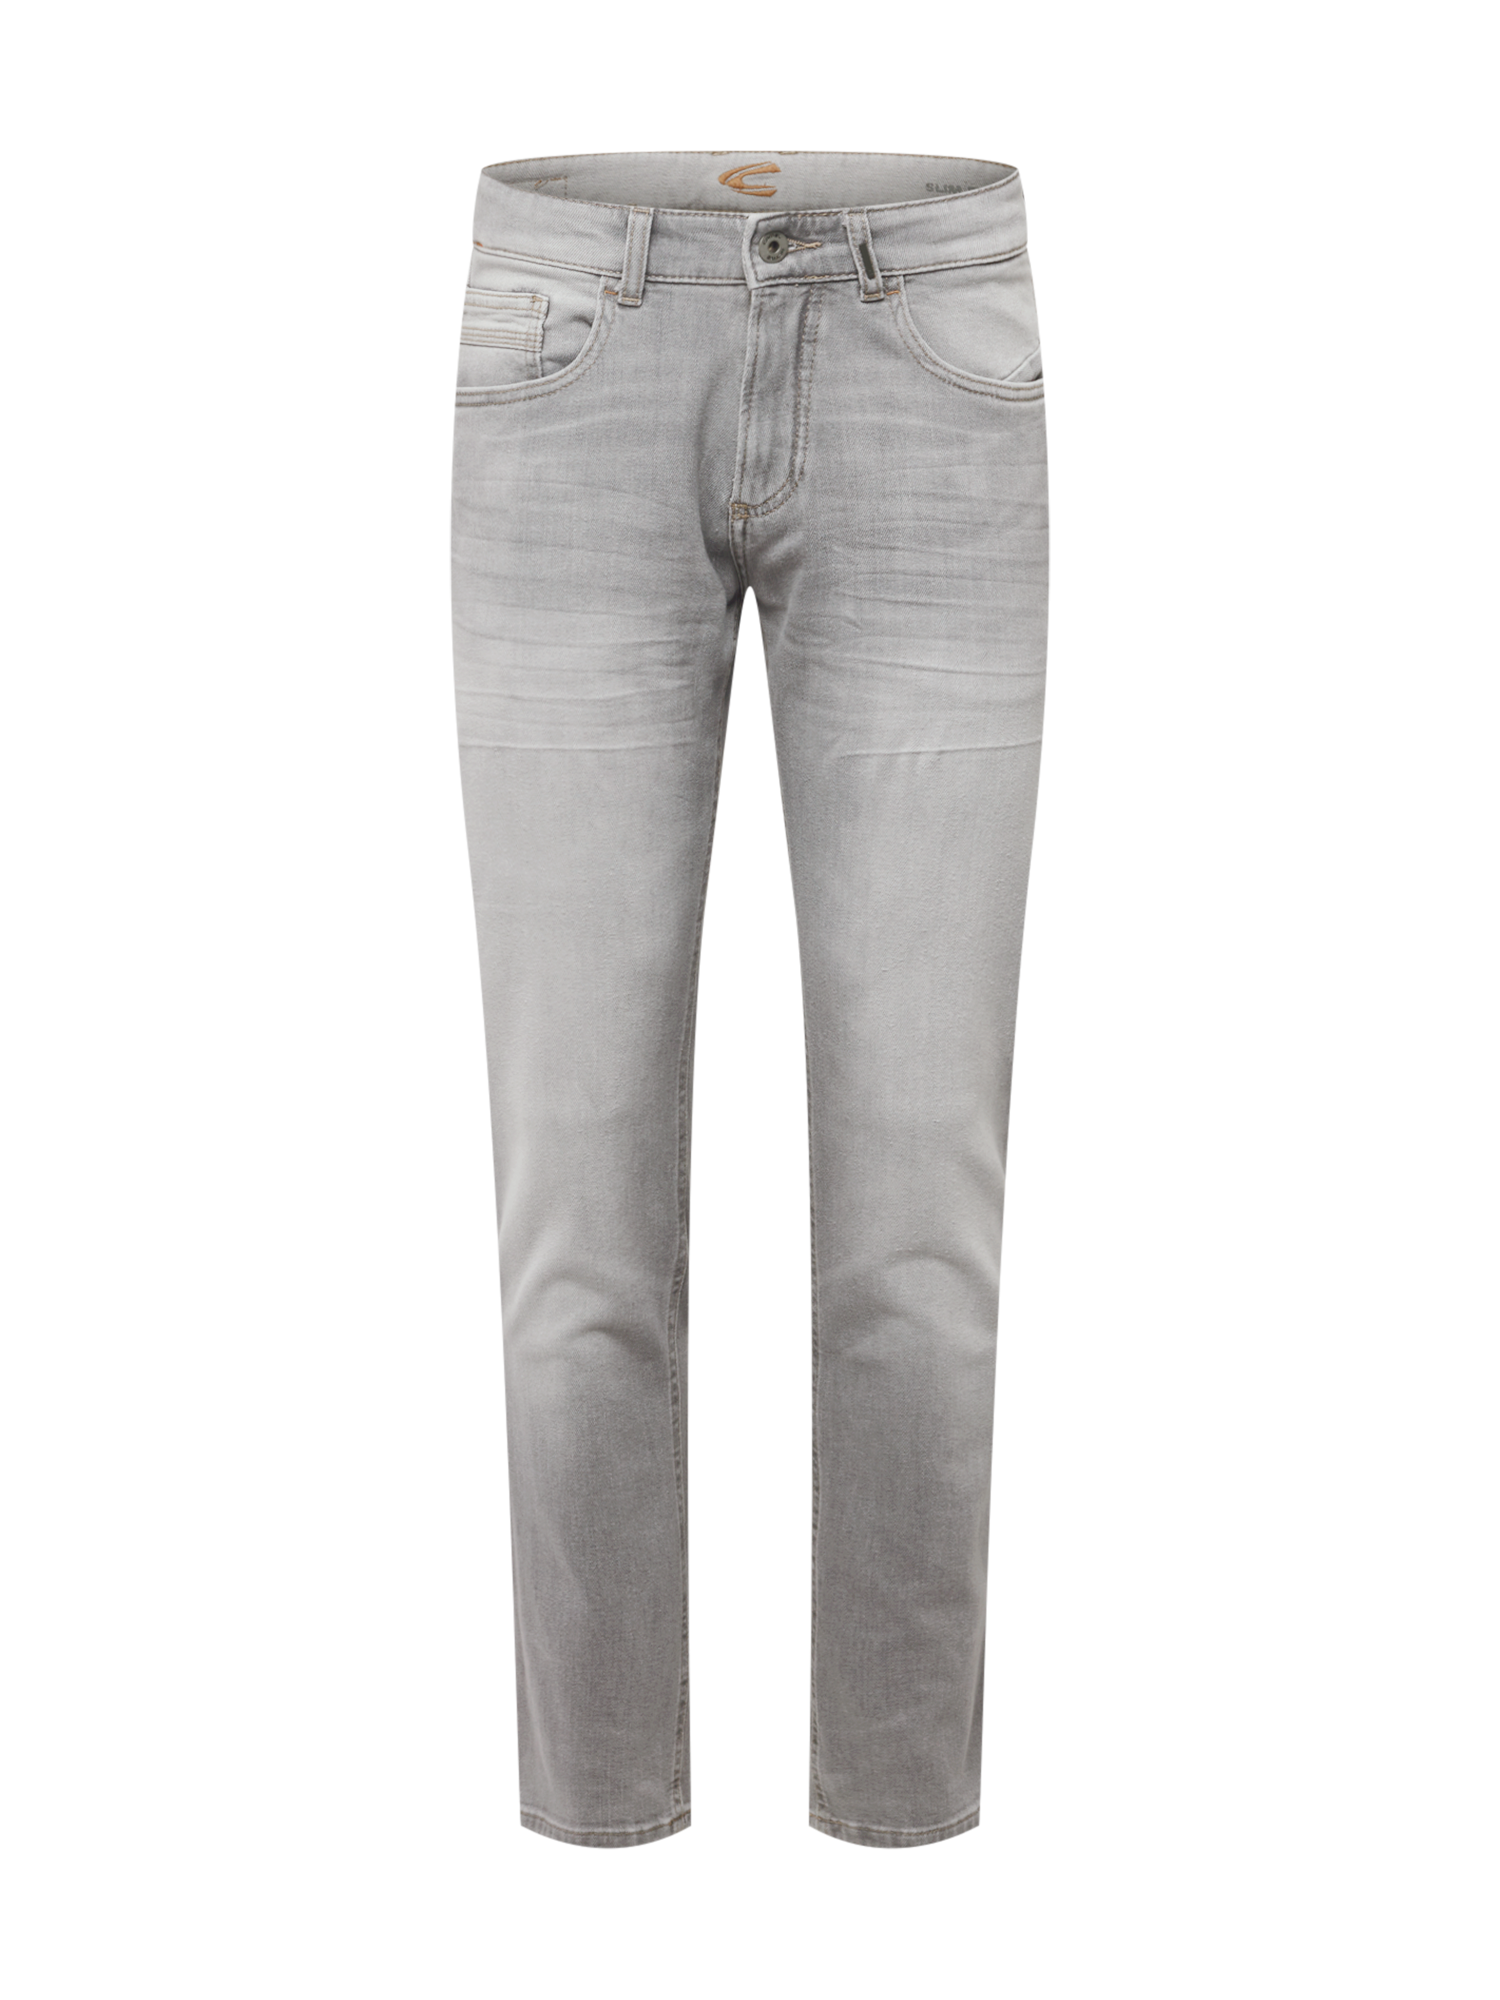 CAMEL ACTIVE Jeans in Grau 